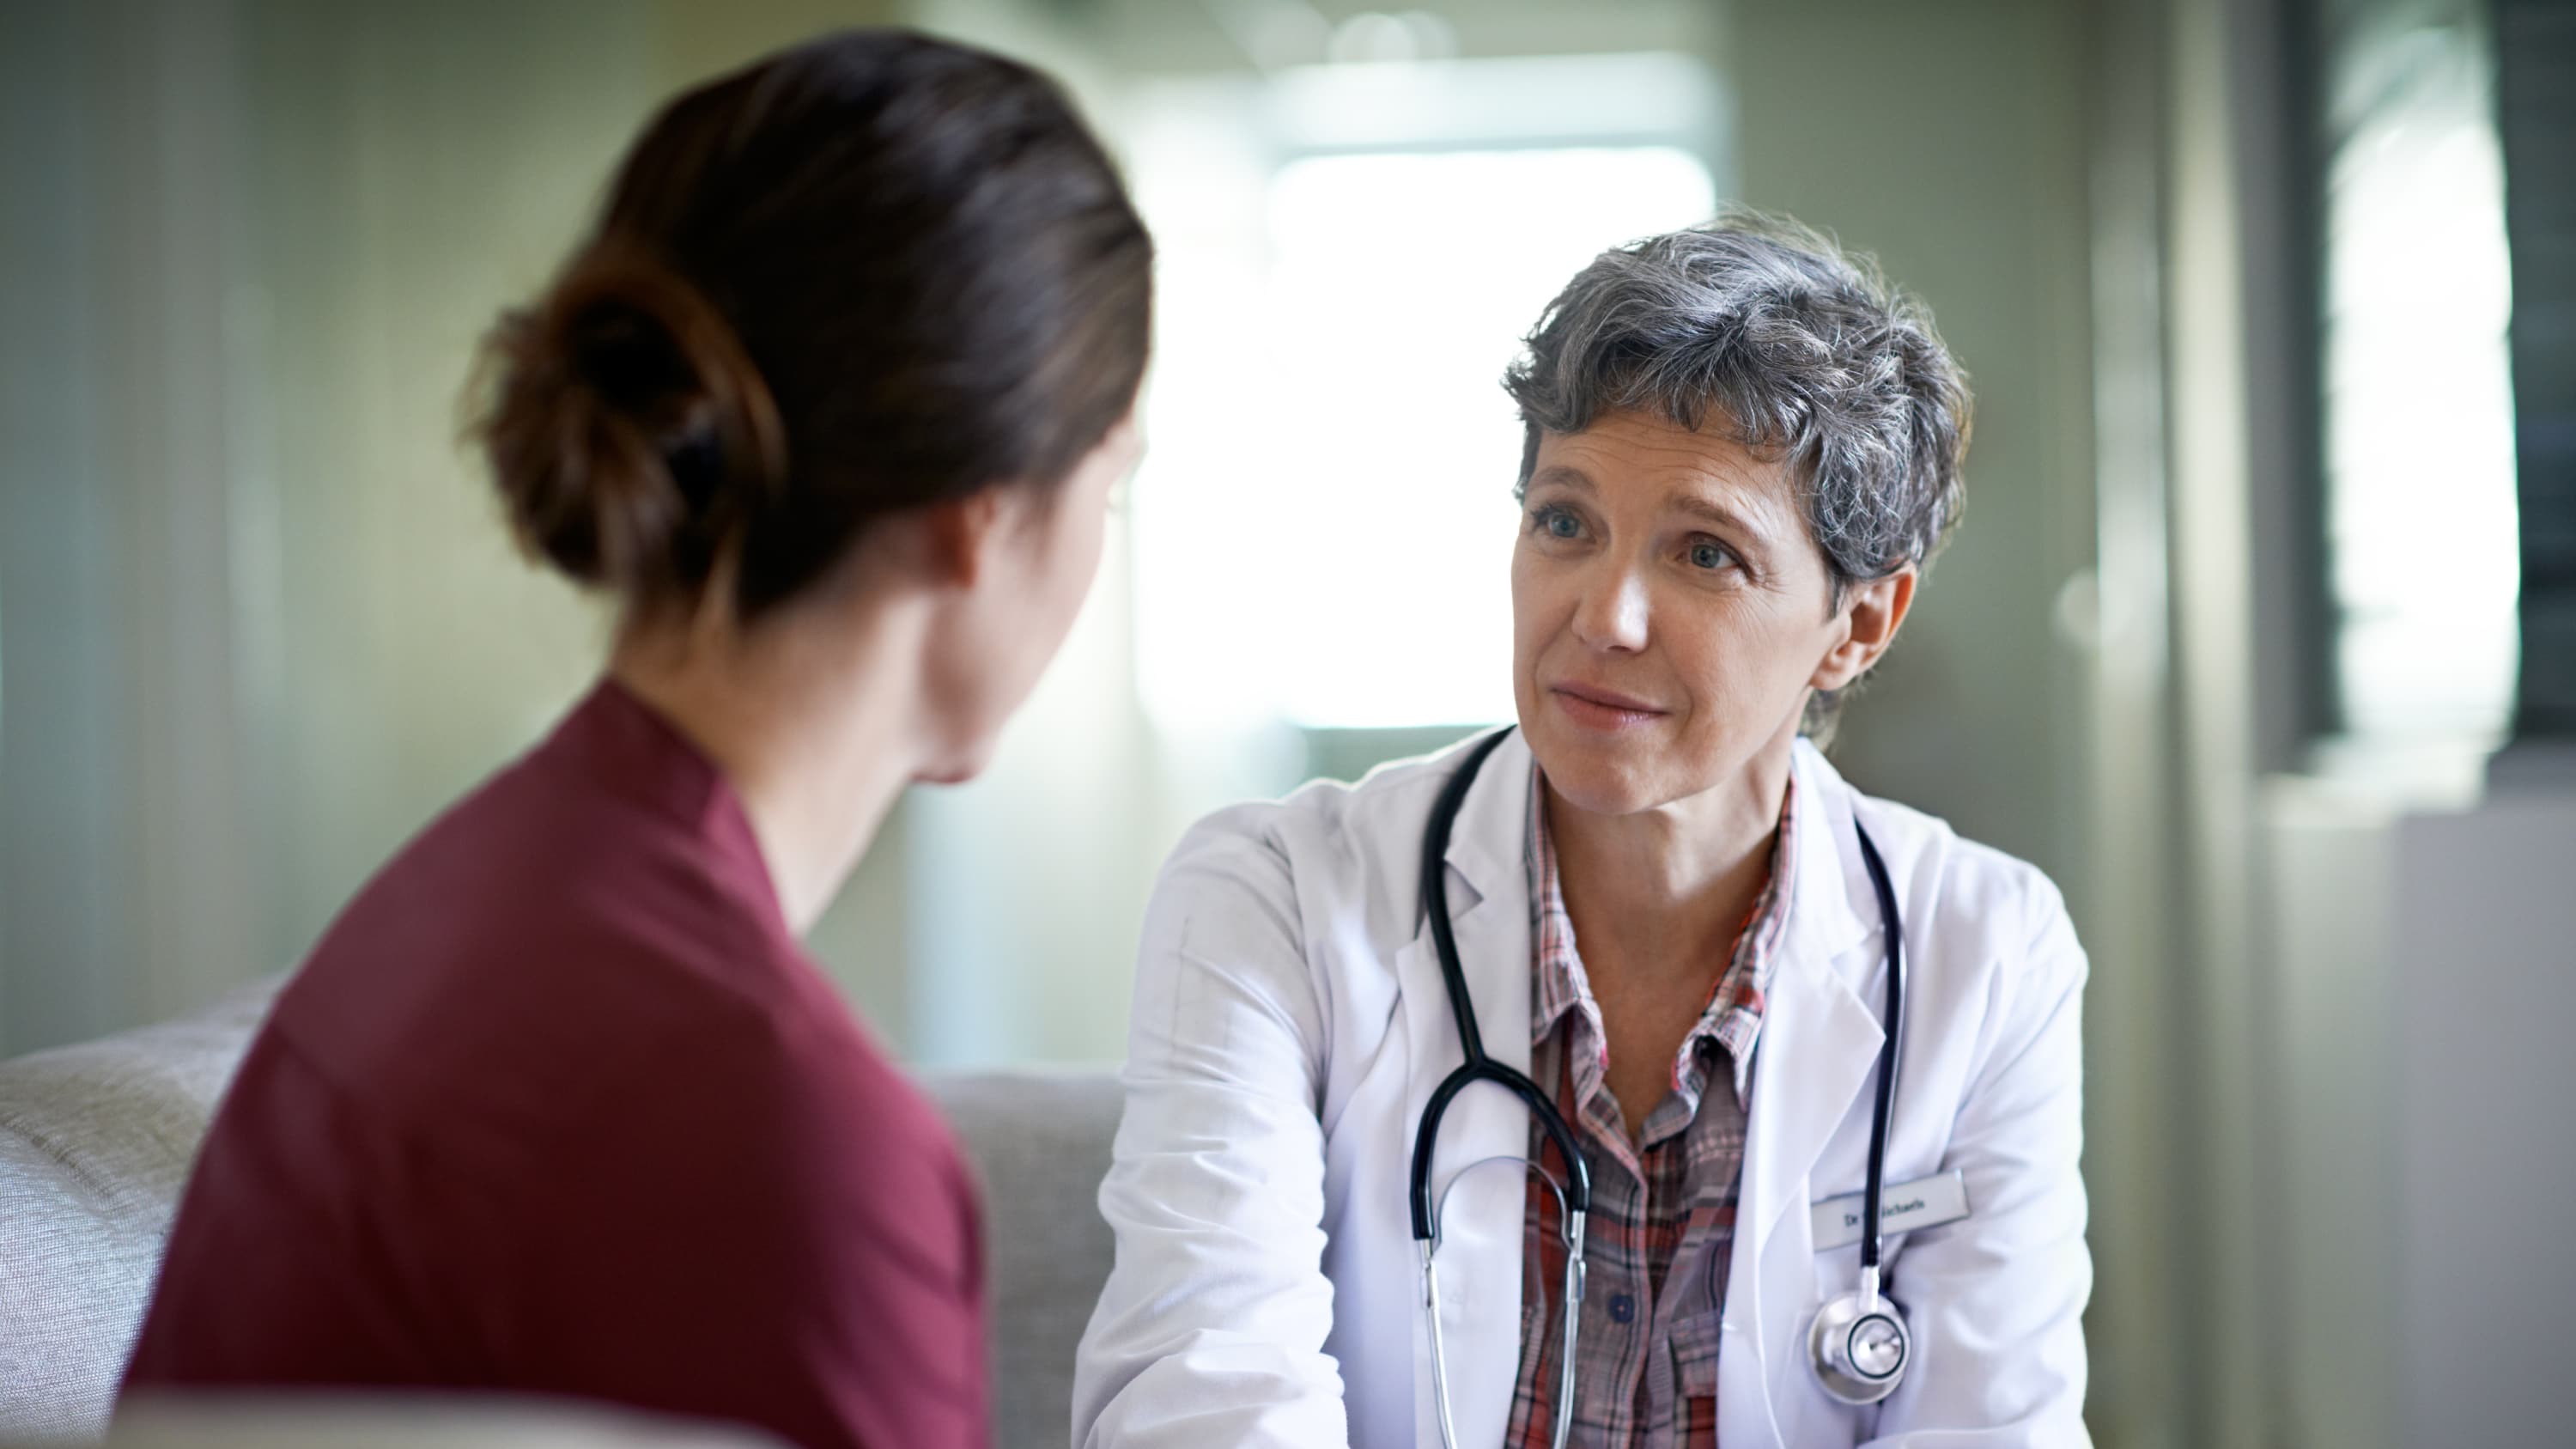 a doctor possibly discussing radiation therapy for pancreatic cancer with a female patient.